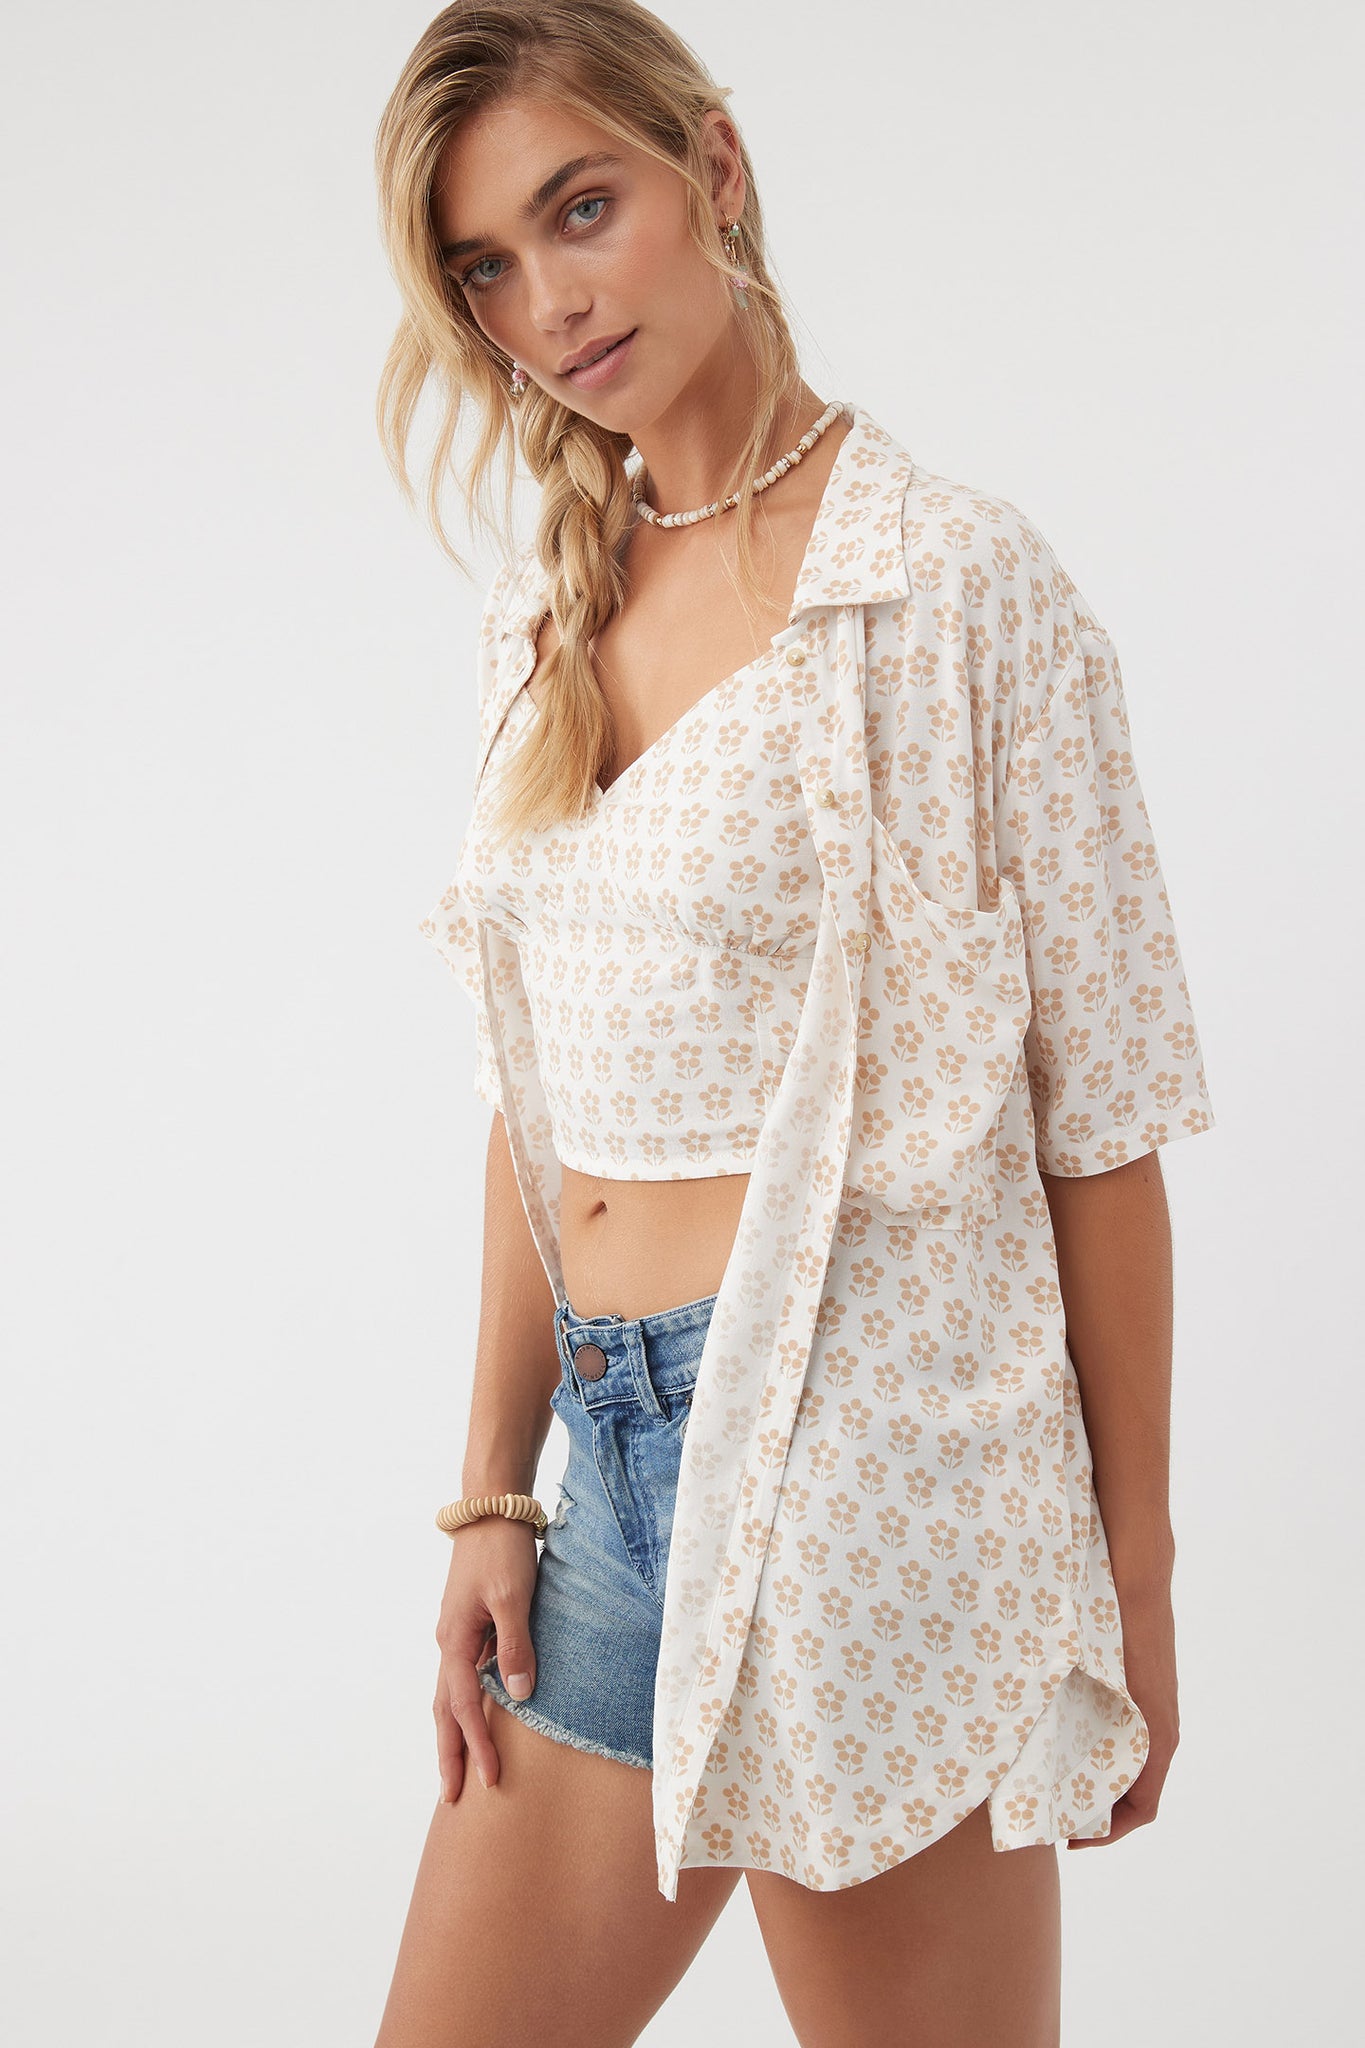 TRICIA DAISY BUTTON-UP TOP